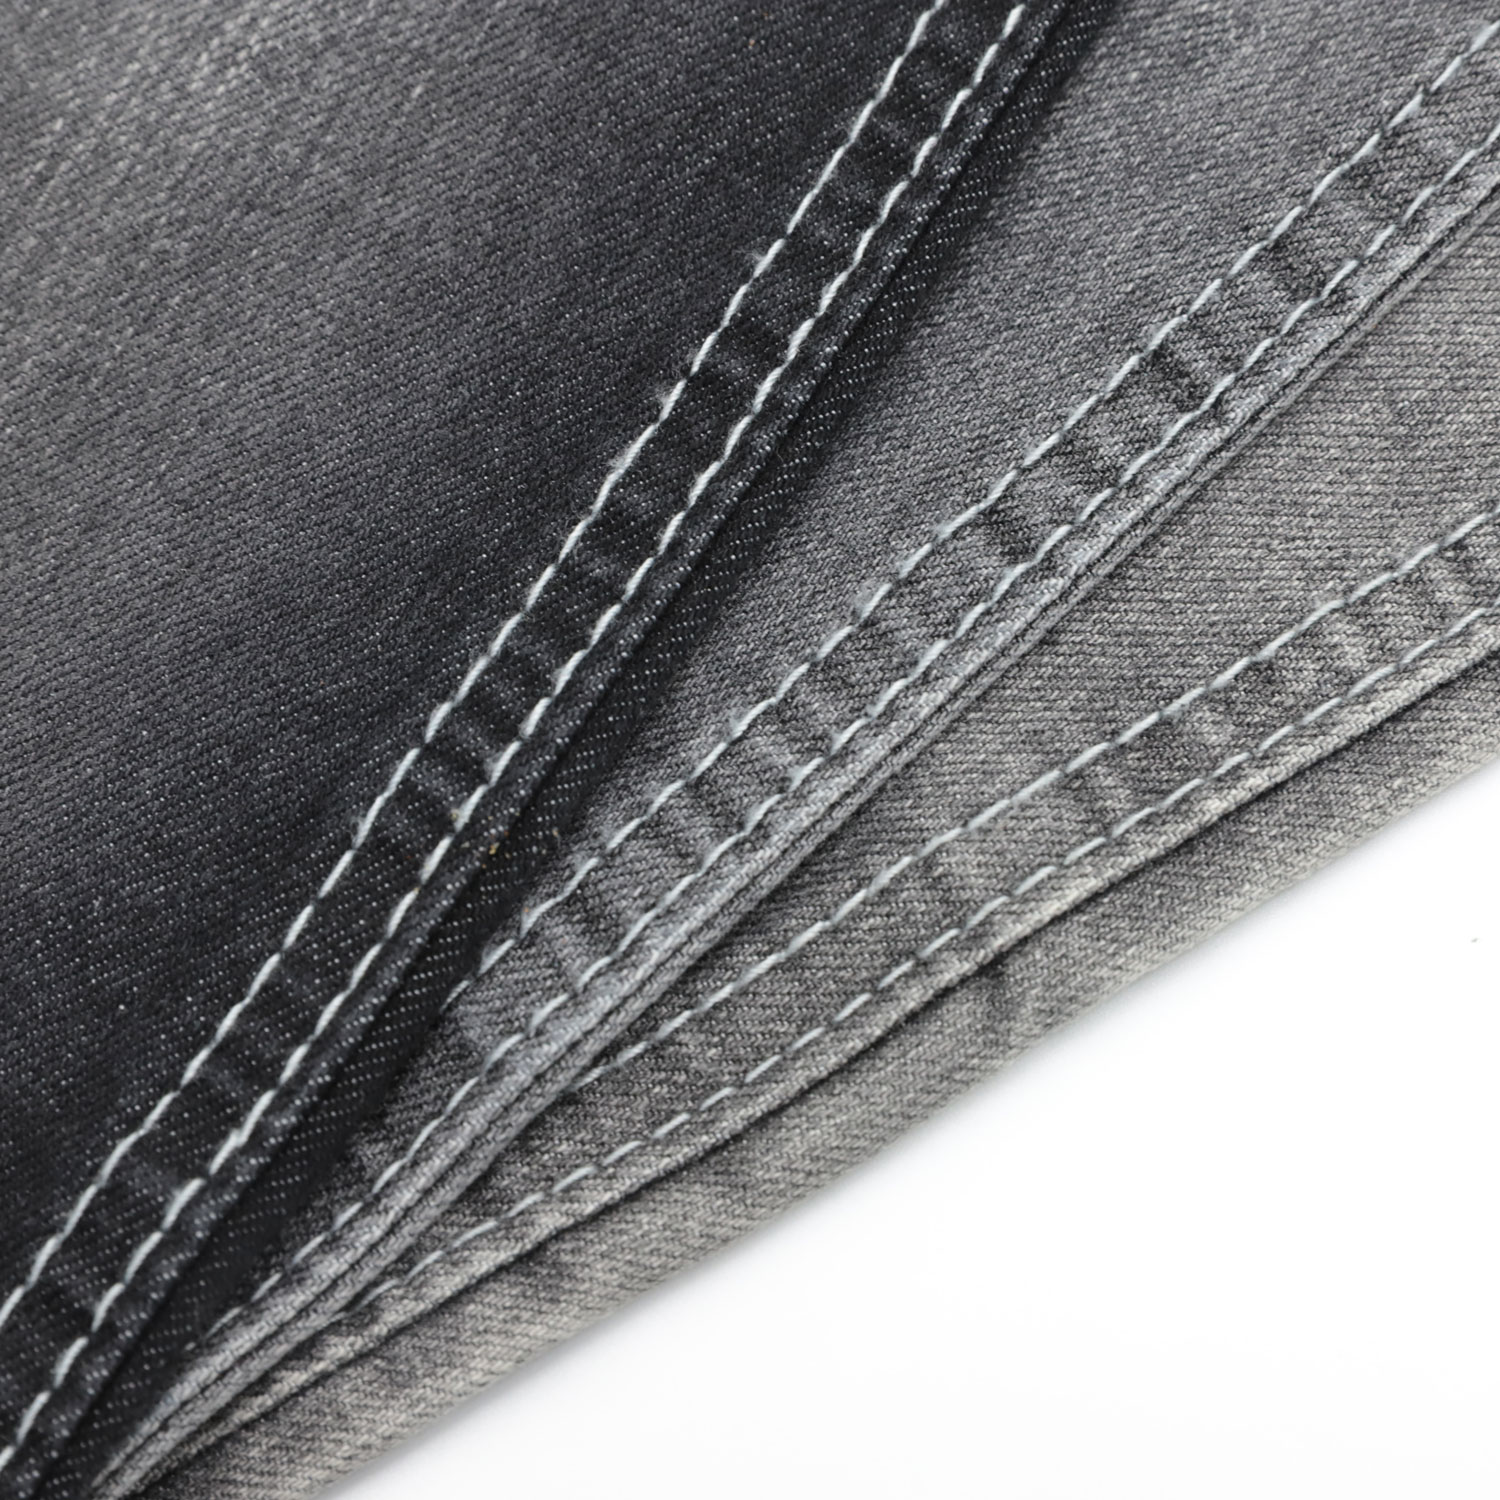 Important Things to Consider Before Buying a Non-stretch Denim Fabric 1